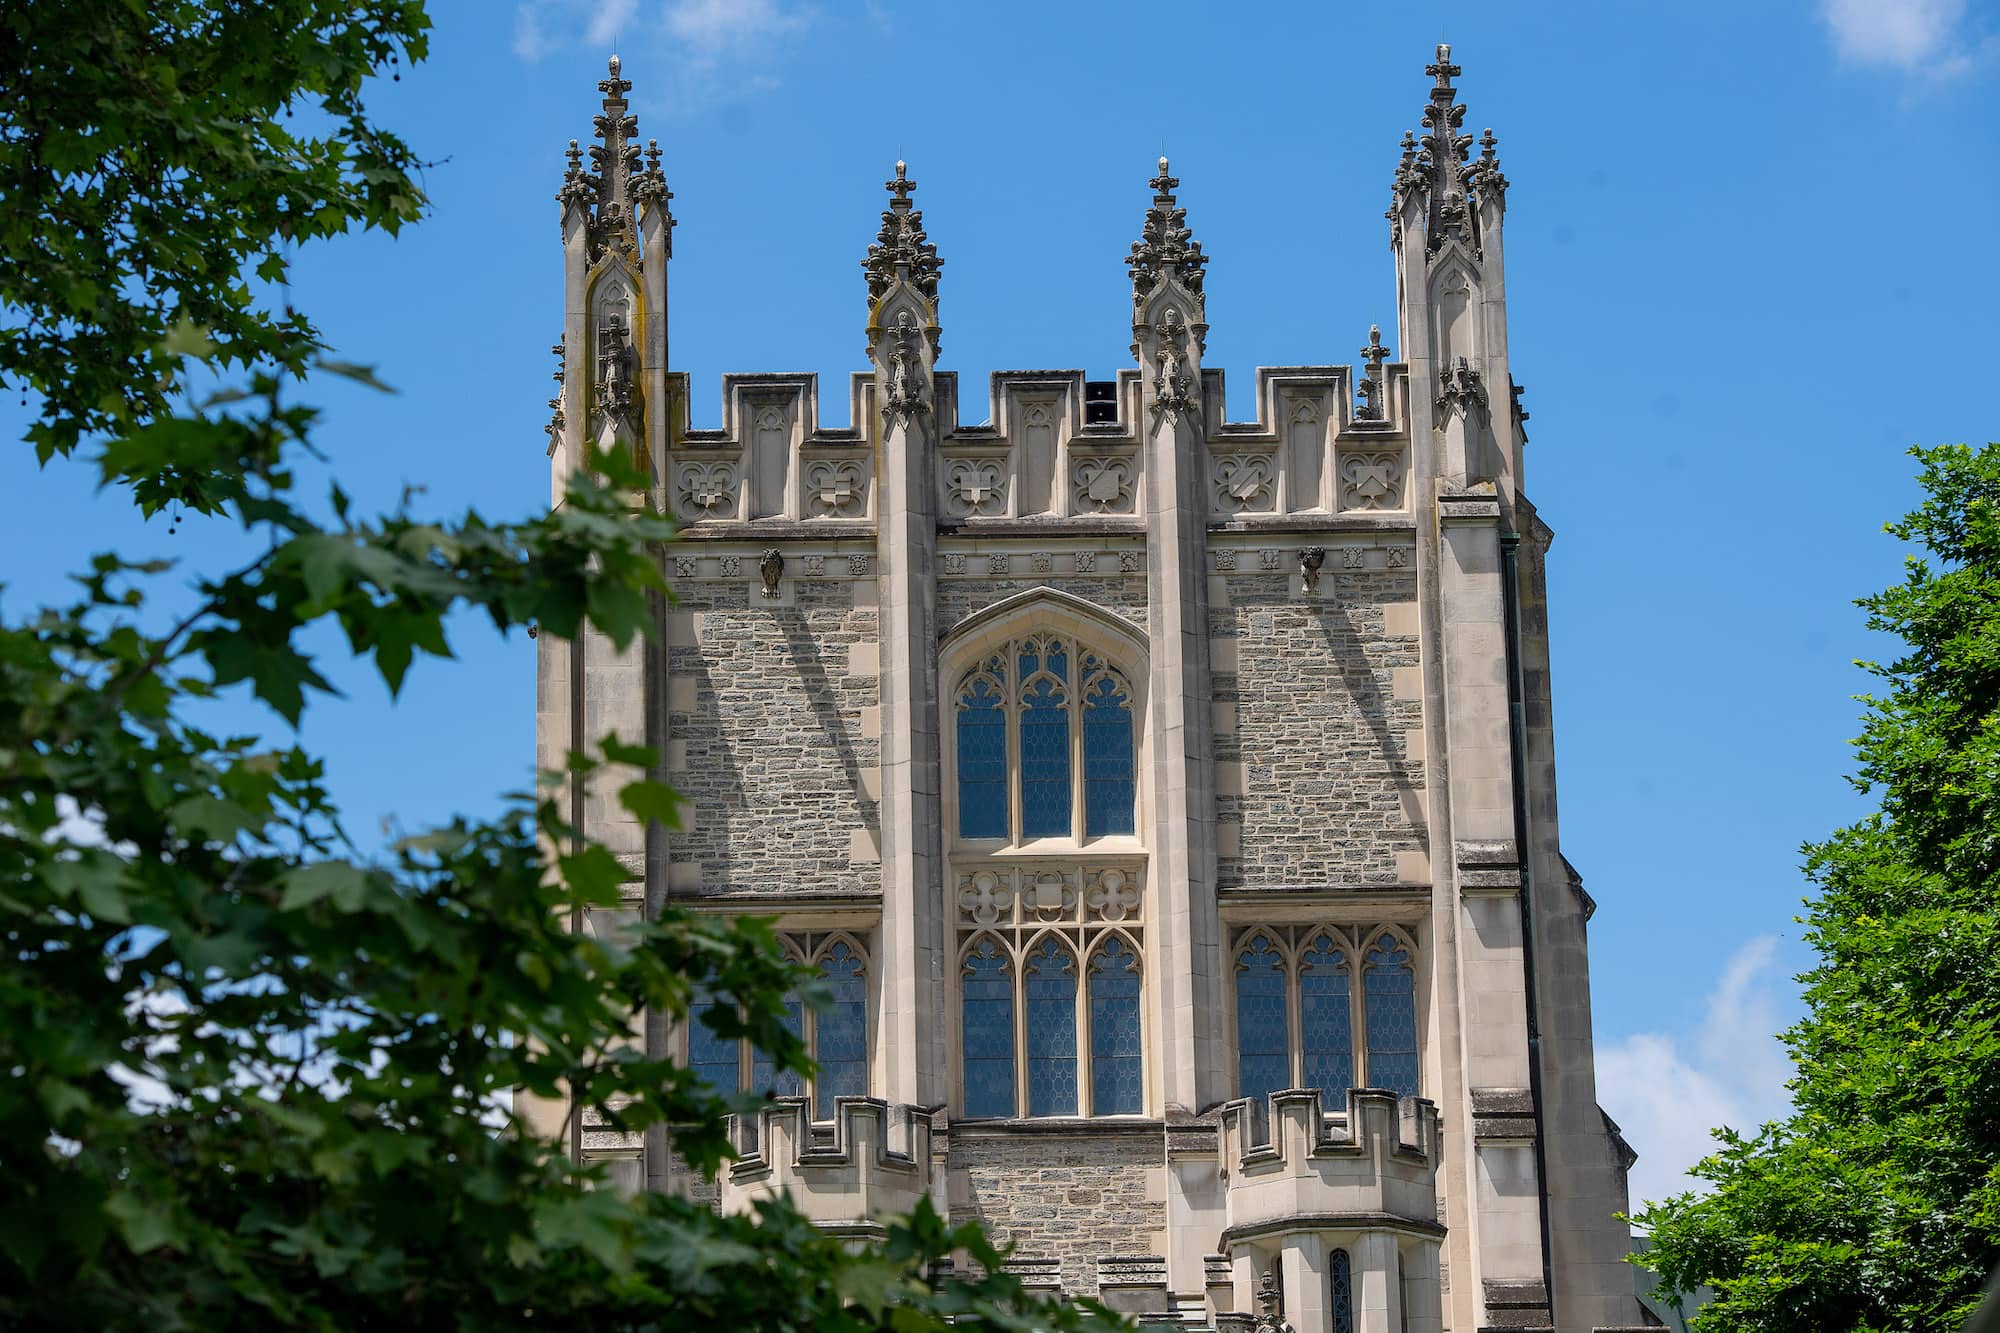 A detailed view of the top of the central tower of Thompson Library on Vassar Campus, a large, stone building with stained-glass windows and classical architecture.